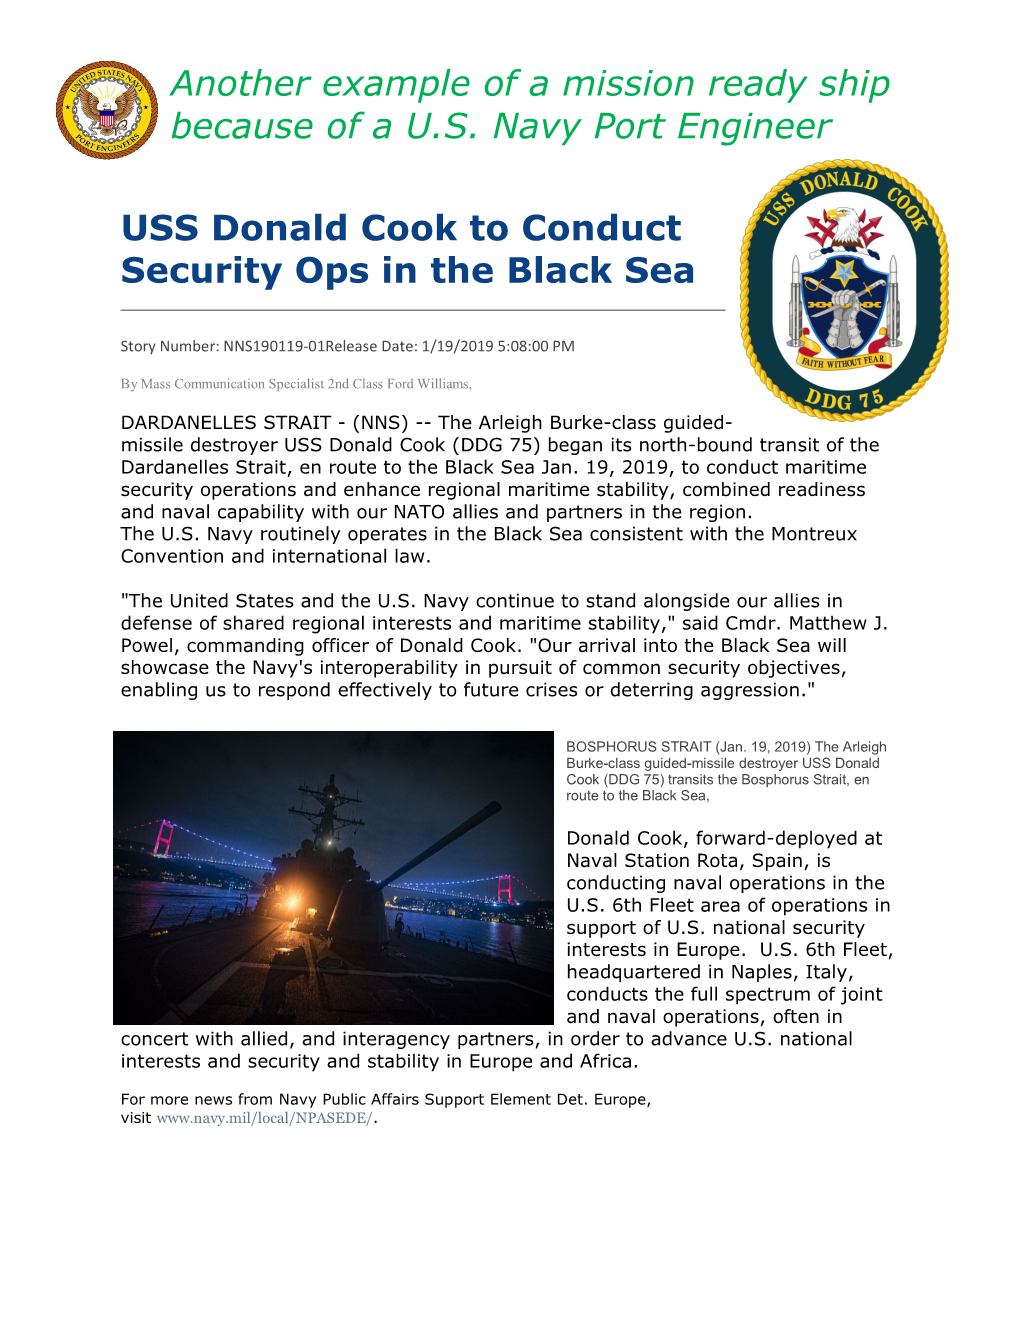 USS Donald Cook to Conduct Security Ops in the Black Sea